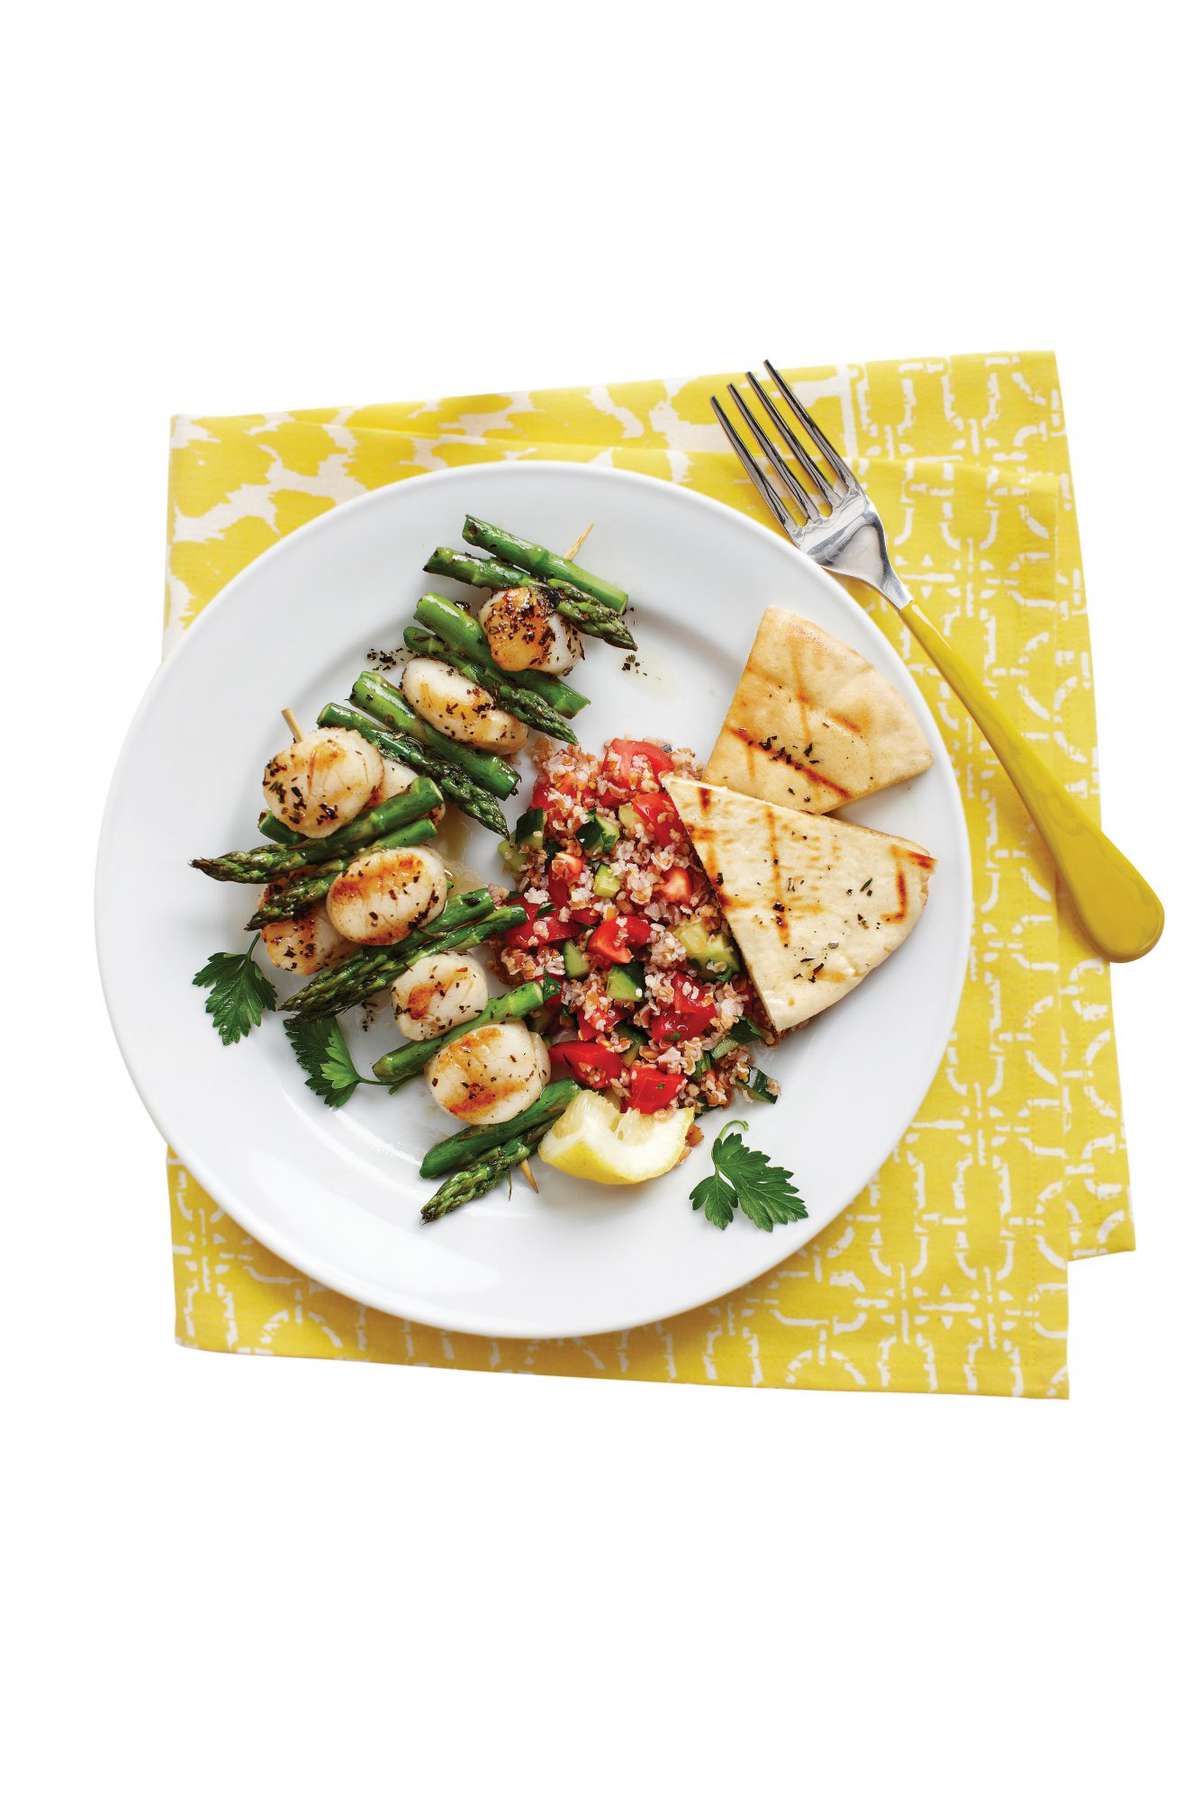 5 Quick Recipes for Kabobs: Grilled Scallop Kabobs